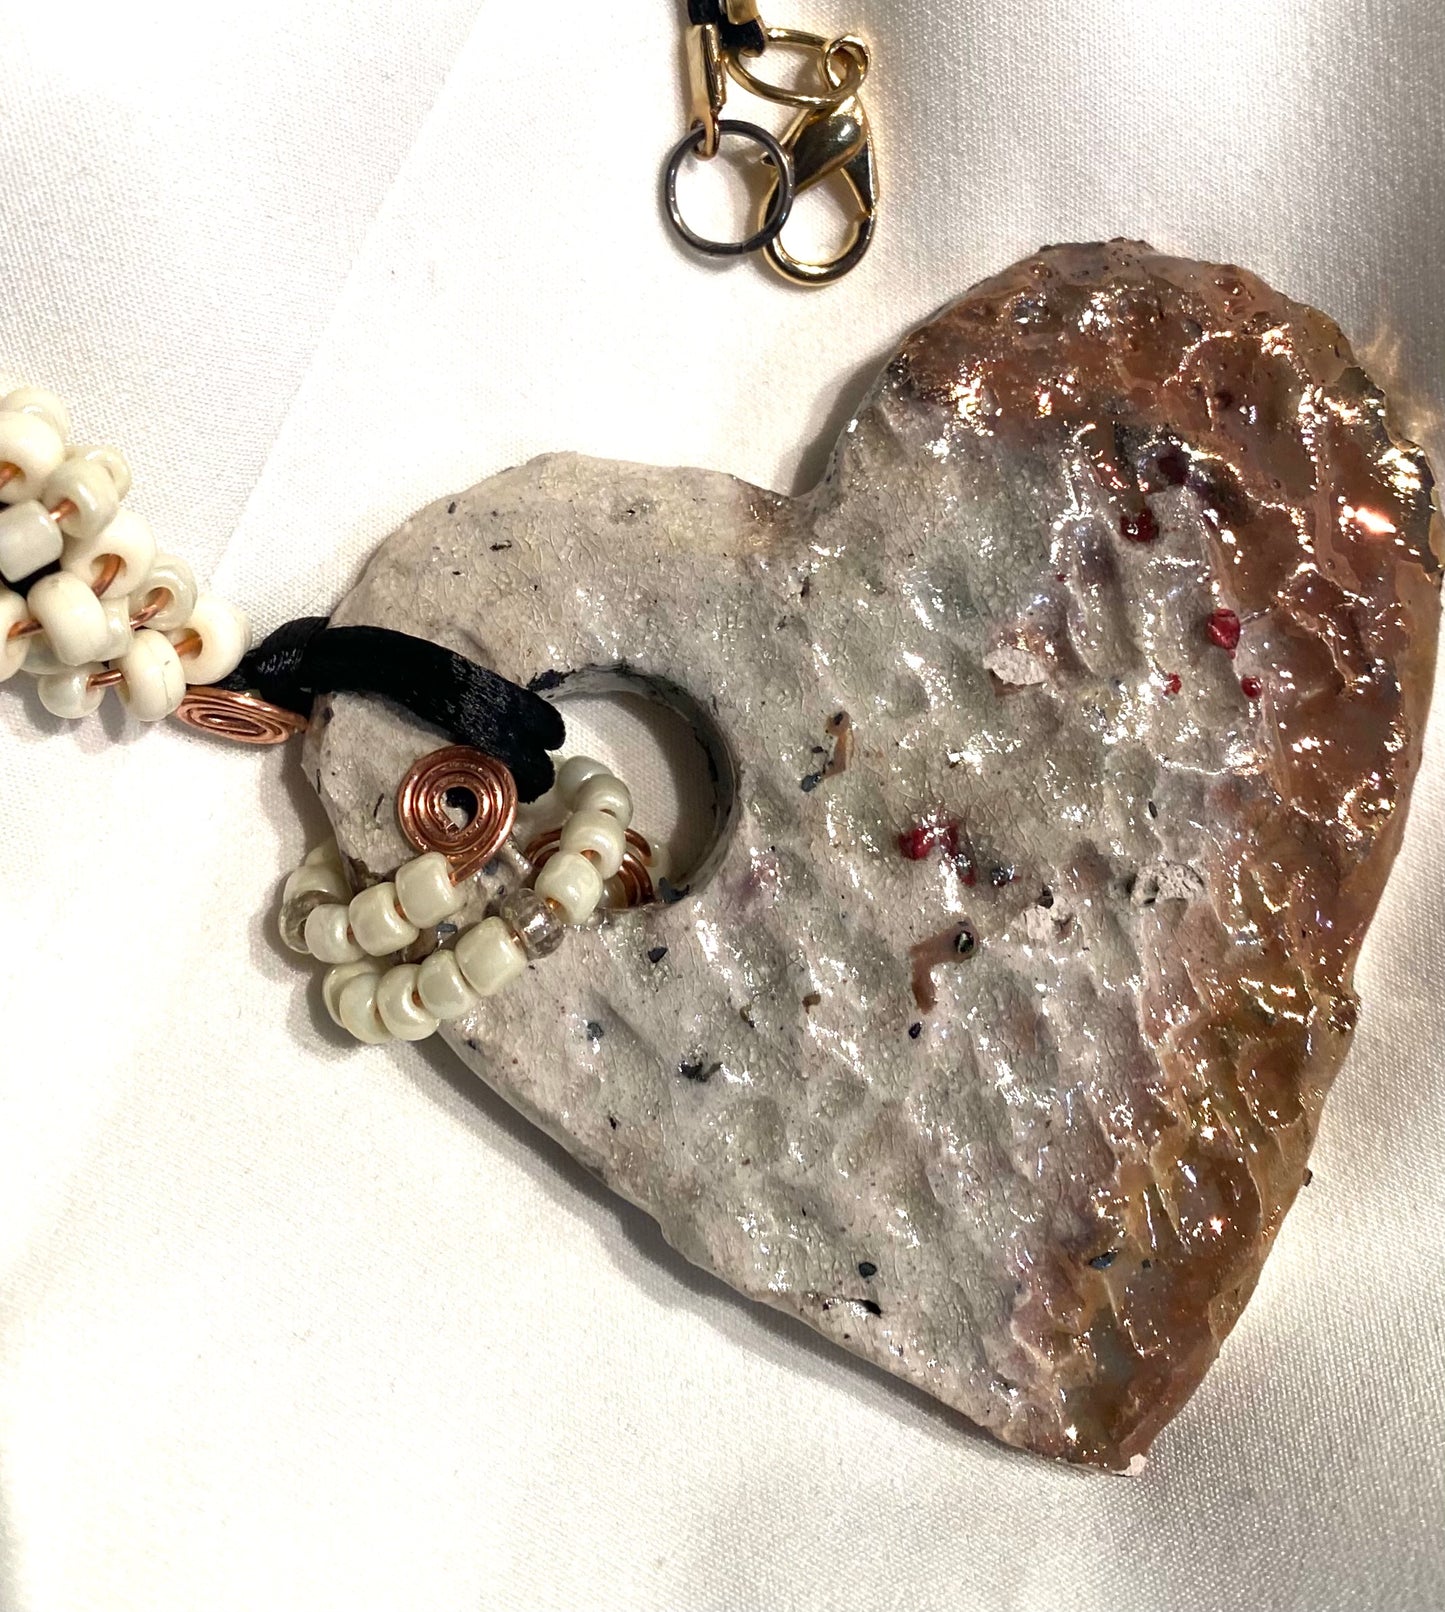 Have A Heart ! Each heart pendant is handmade with love! It is 3" x 3" and weighs approx. 3ozs. It has white metallic raku glazes that renders a unique translucent  patina. The heart is textured and holds a  spiral of white pony beads on copper wire.  This pendant has a nice 12"black rattail cord!